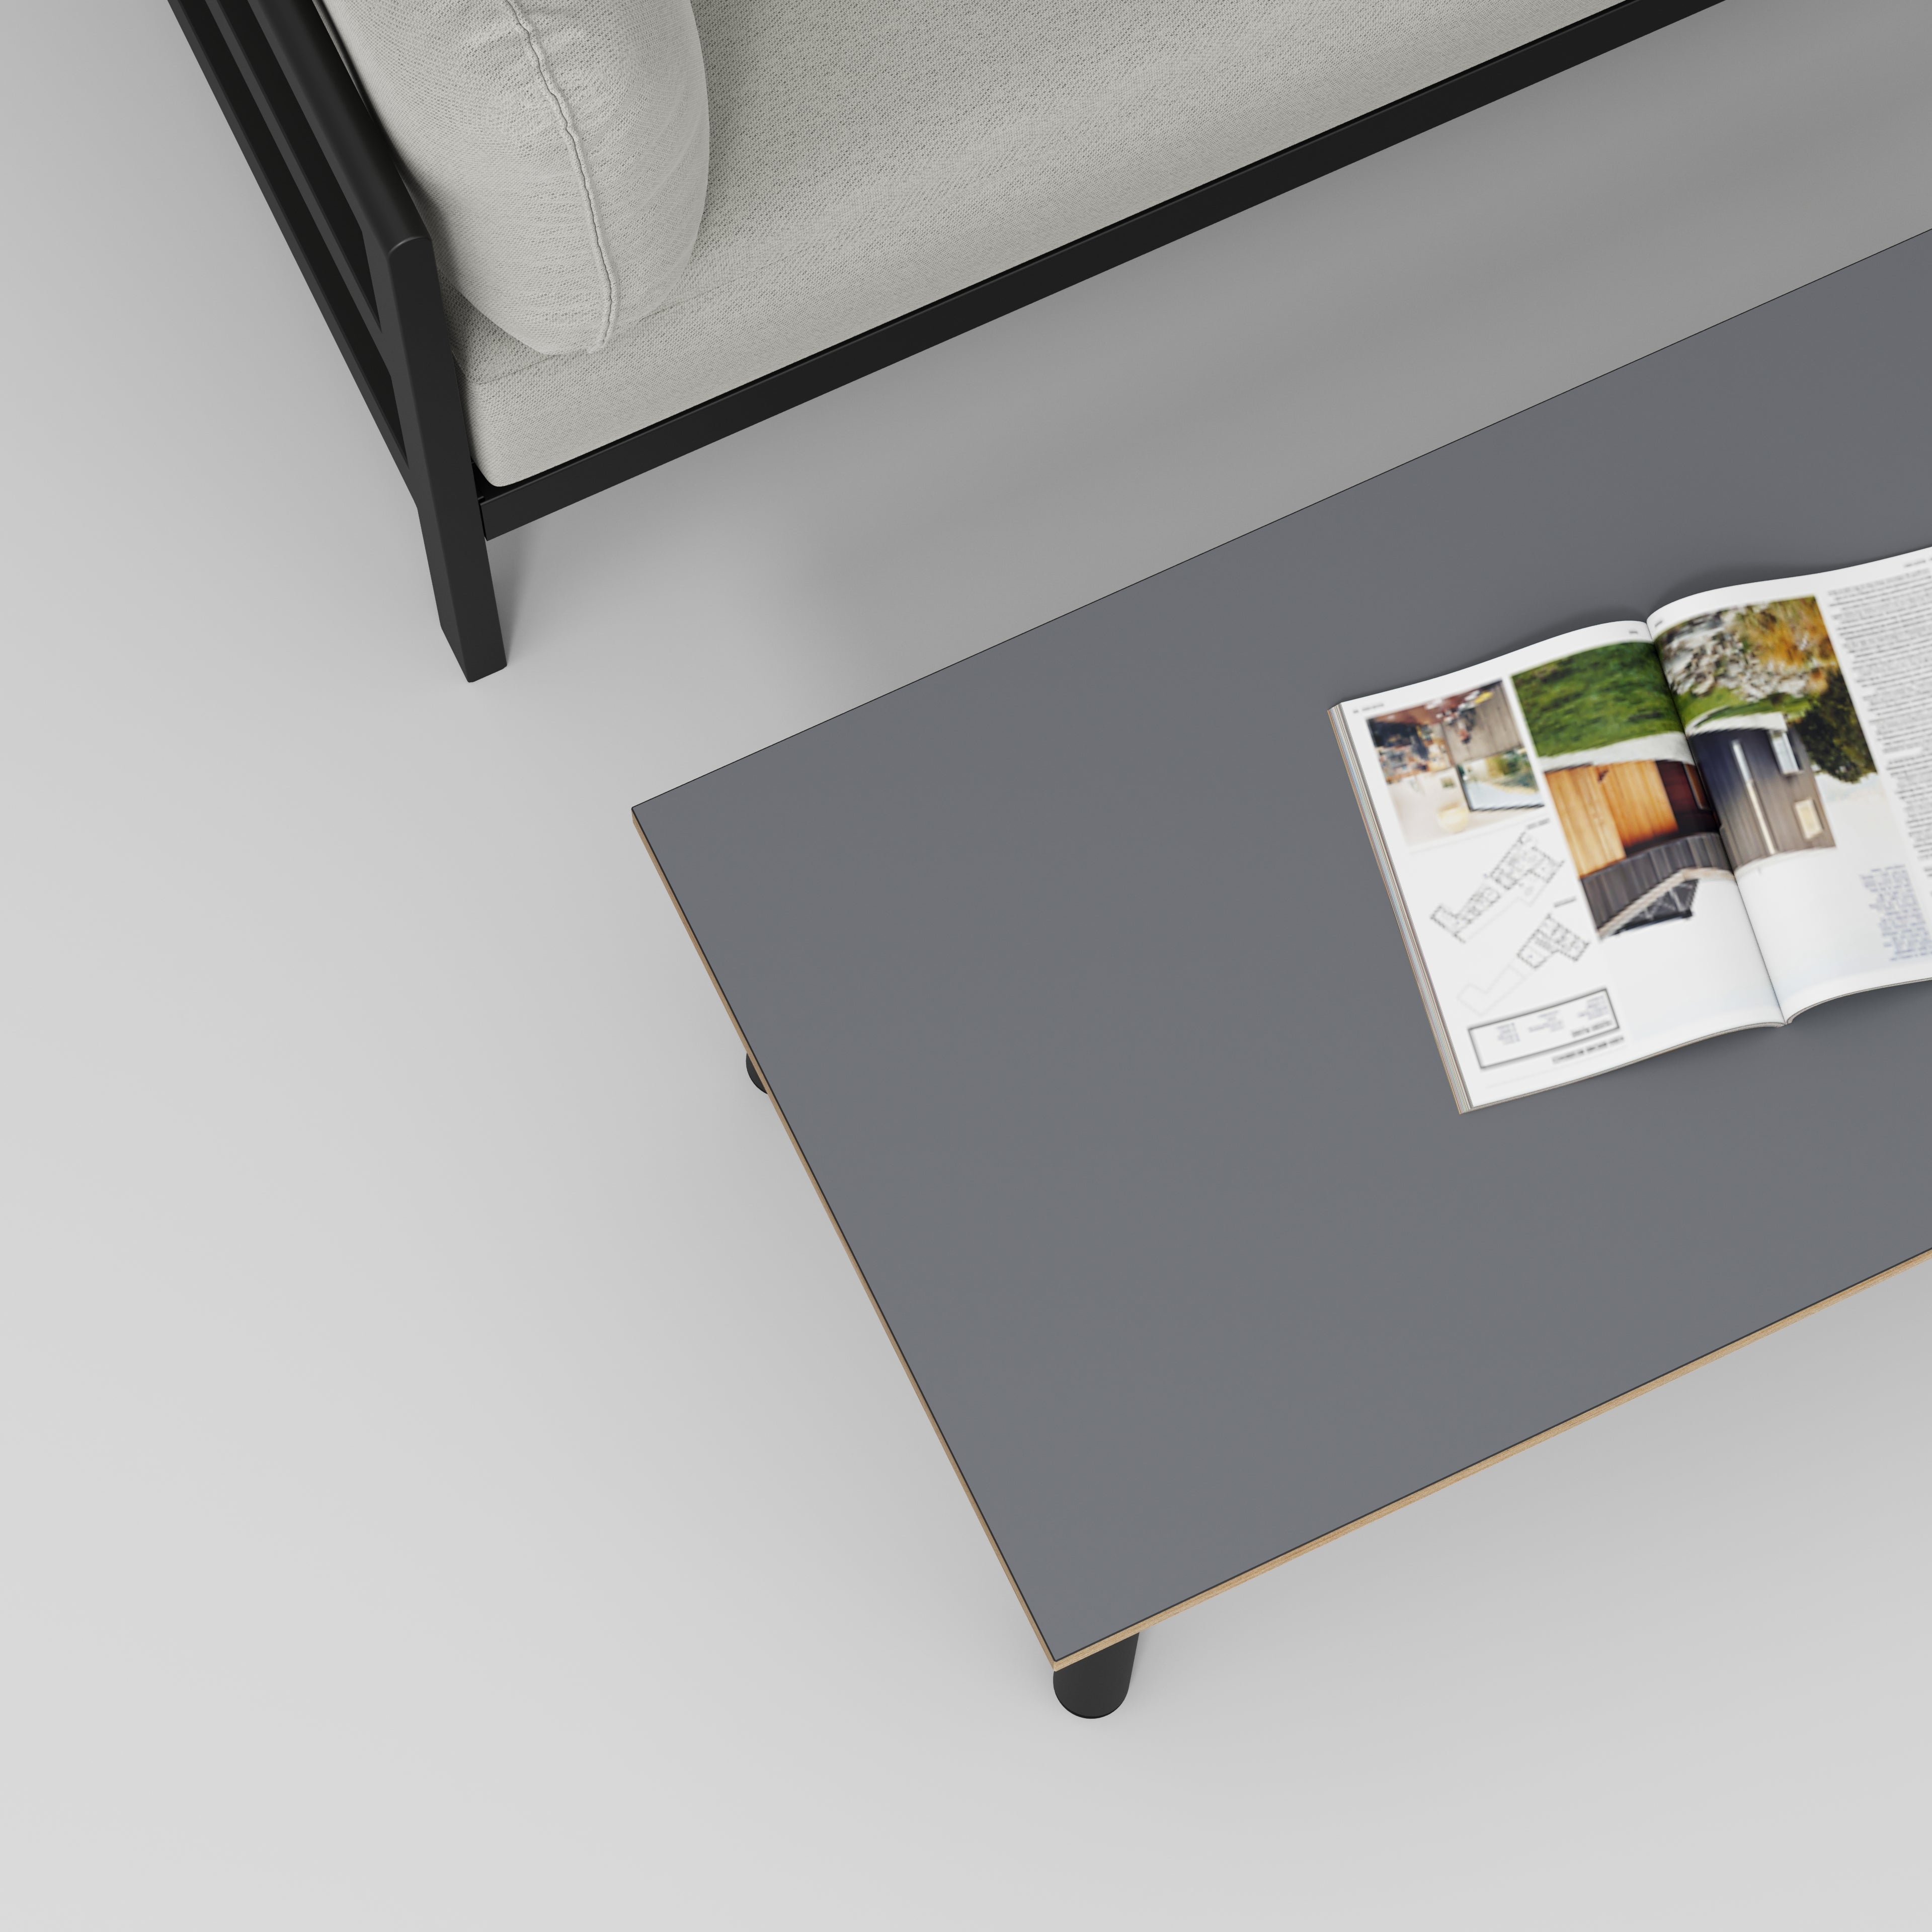 Coffee Table with Black Round Single Pin Legs - Formica Tornado Grey - 1200(w) x 600(d) x 425(h)